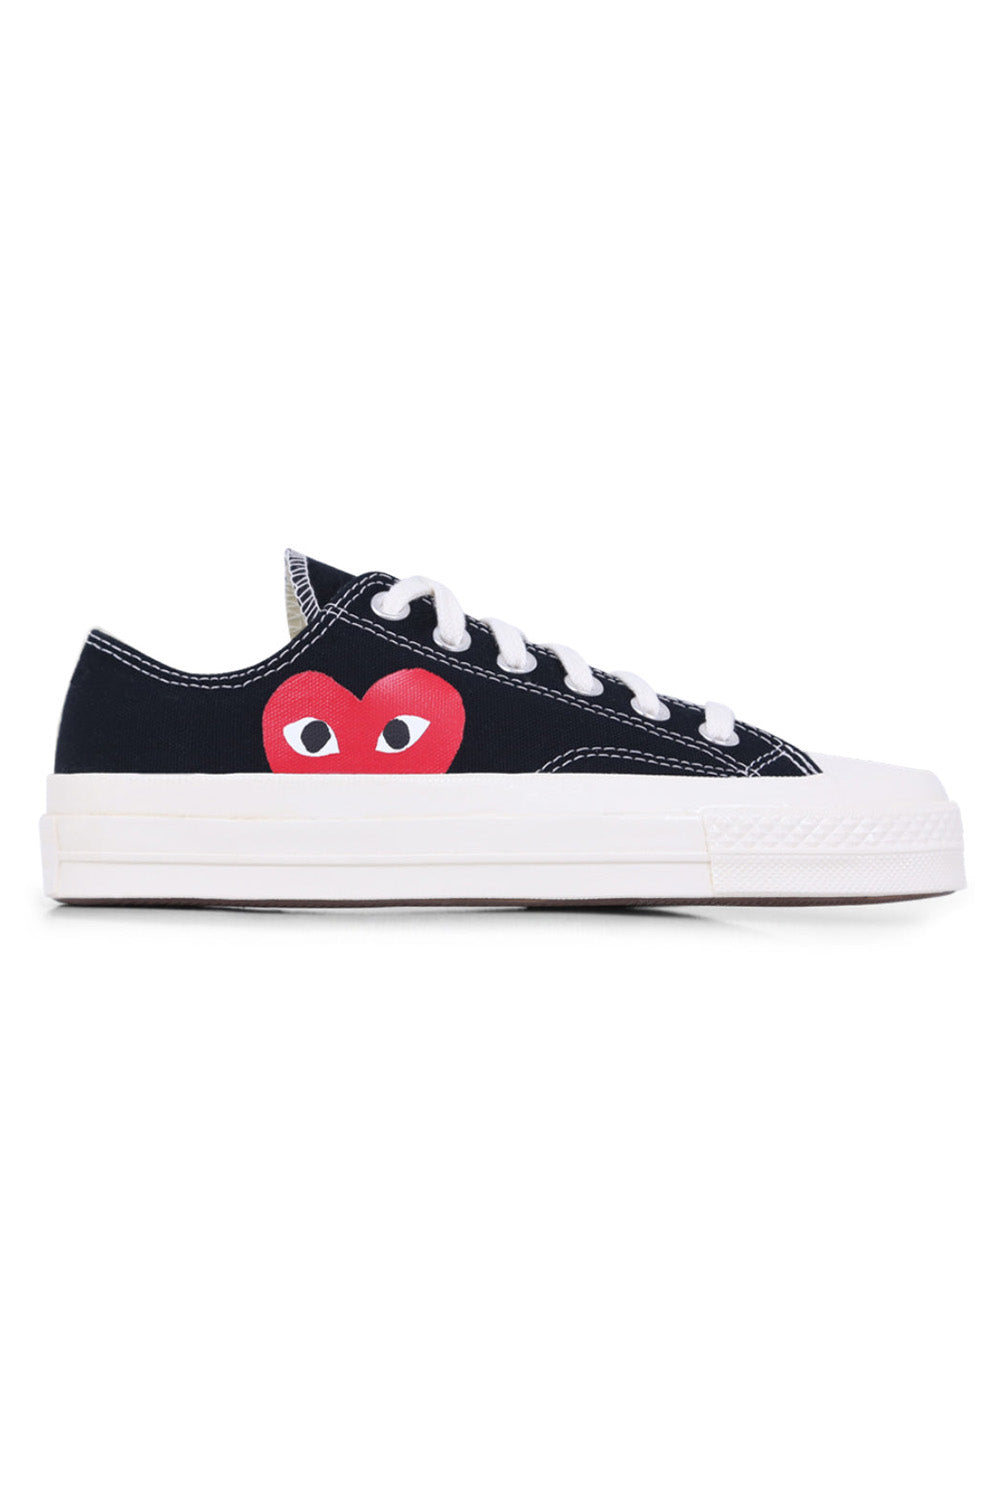 COMME DES GARCONS PLAY SNEAKERS x CONVERSE CHUCK TAYLOR LOW TOP SNEAKER | BLACK